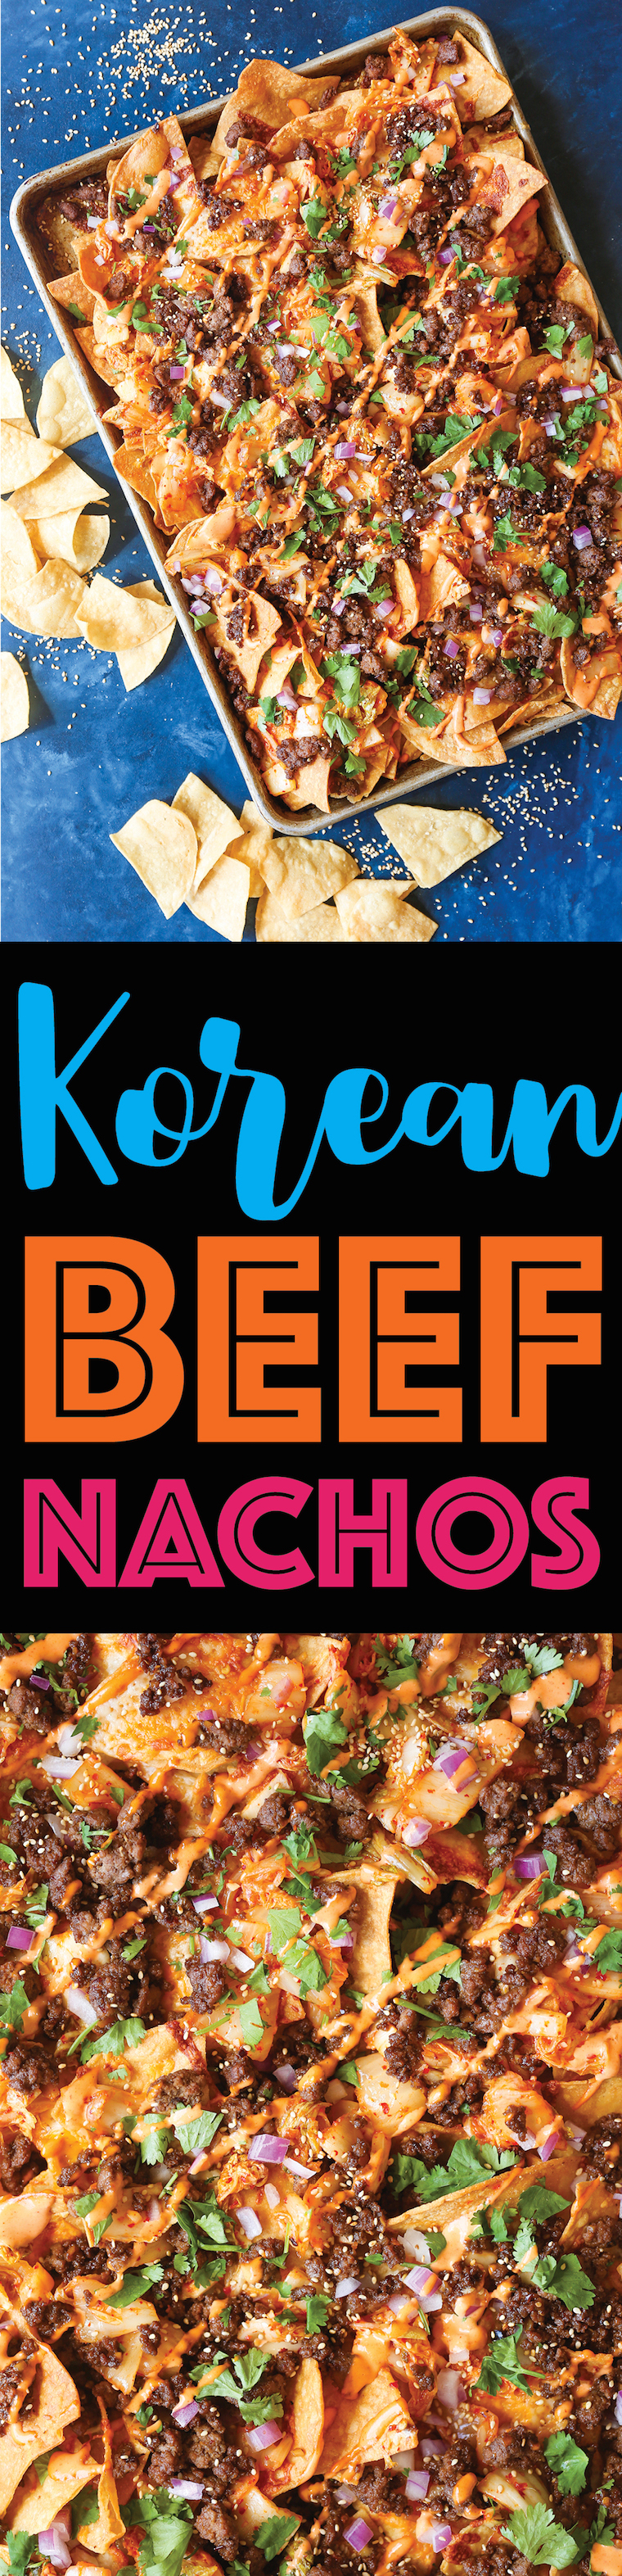 Korean Beef Nachos - These will be the BEST NACHOS of your life! Topped with everyone's favorite Korean beef, caramelized kimchi + a Sriracha mayo drizzle!